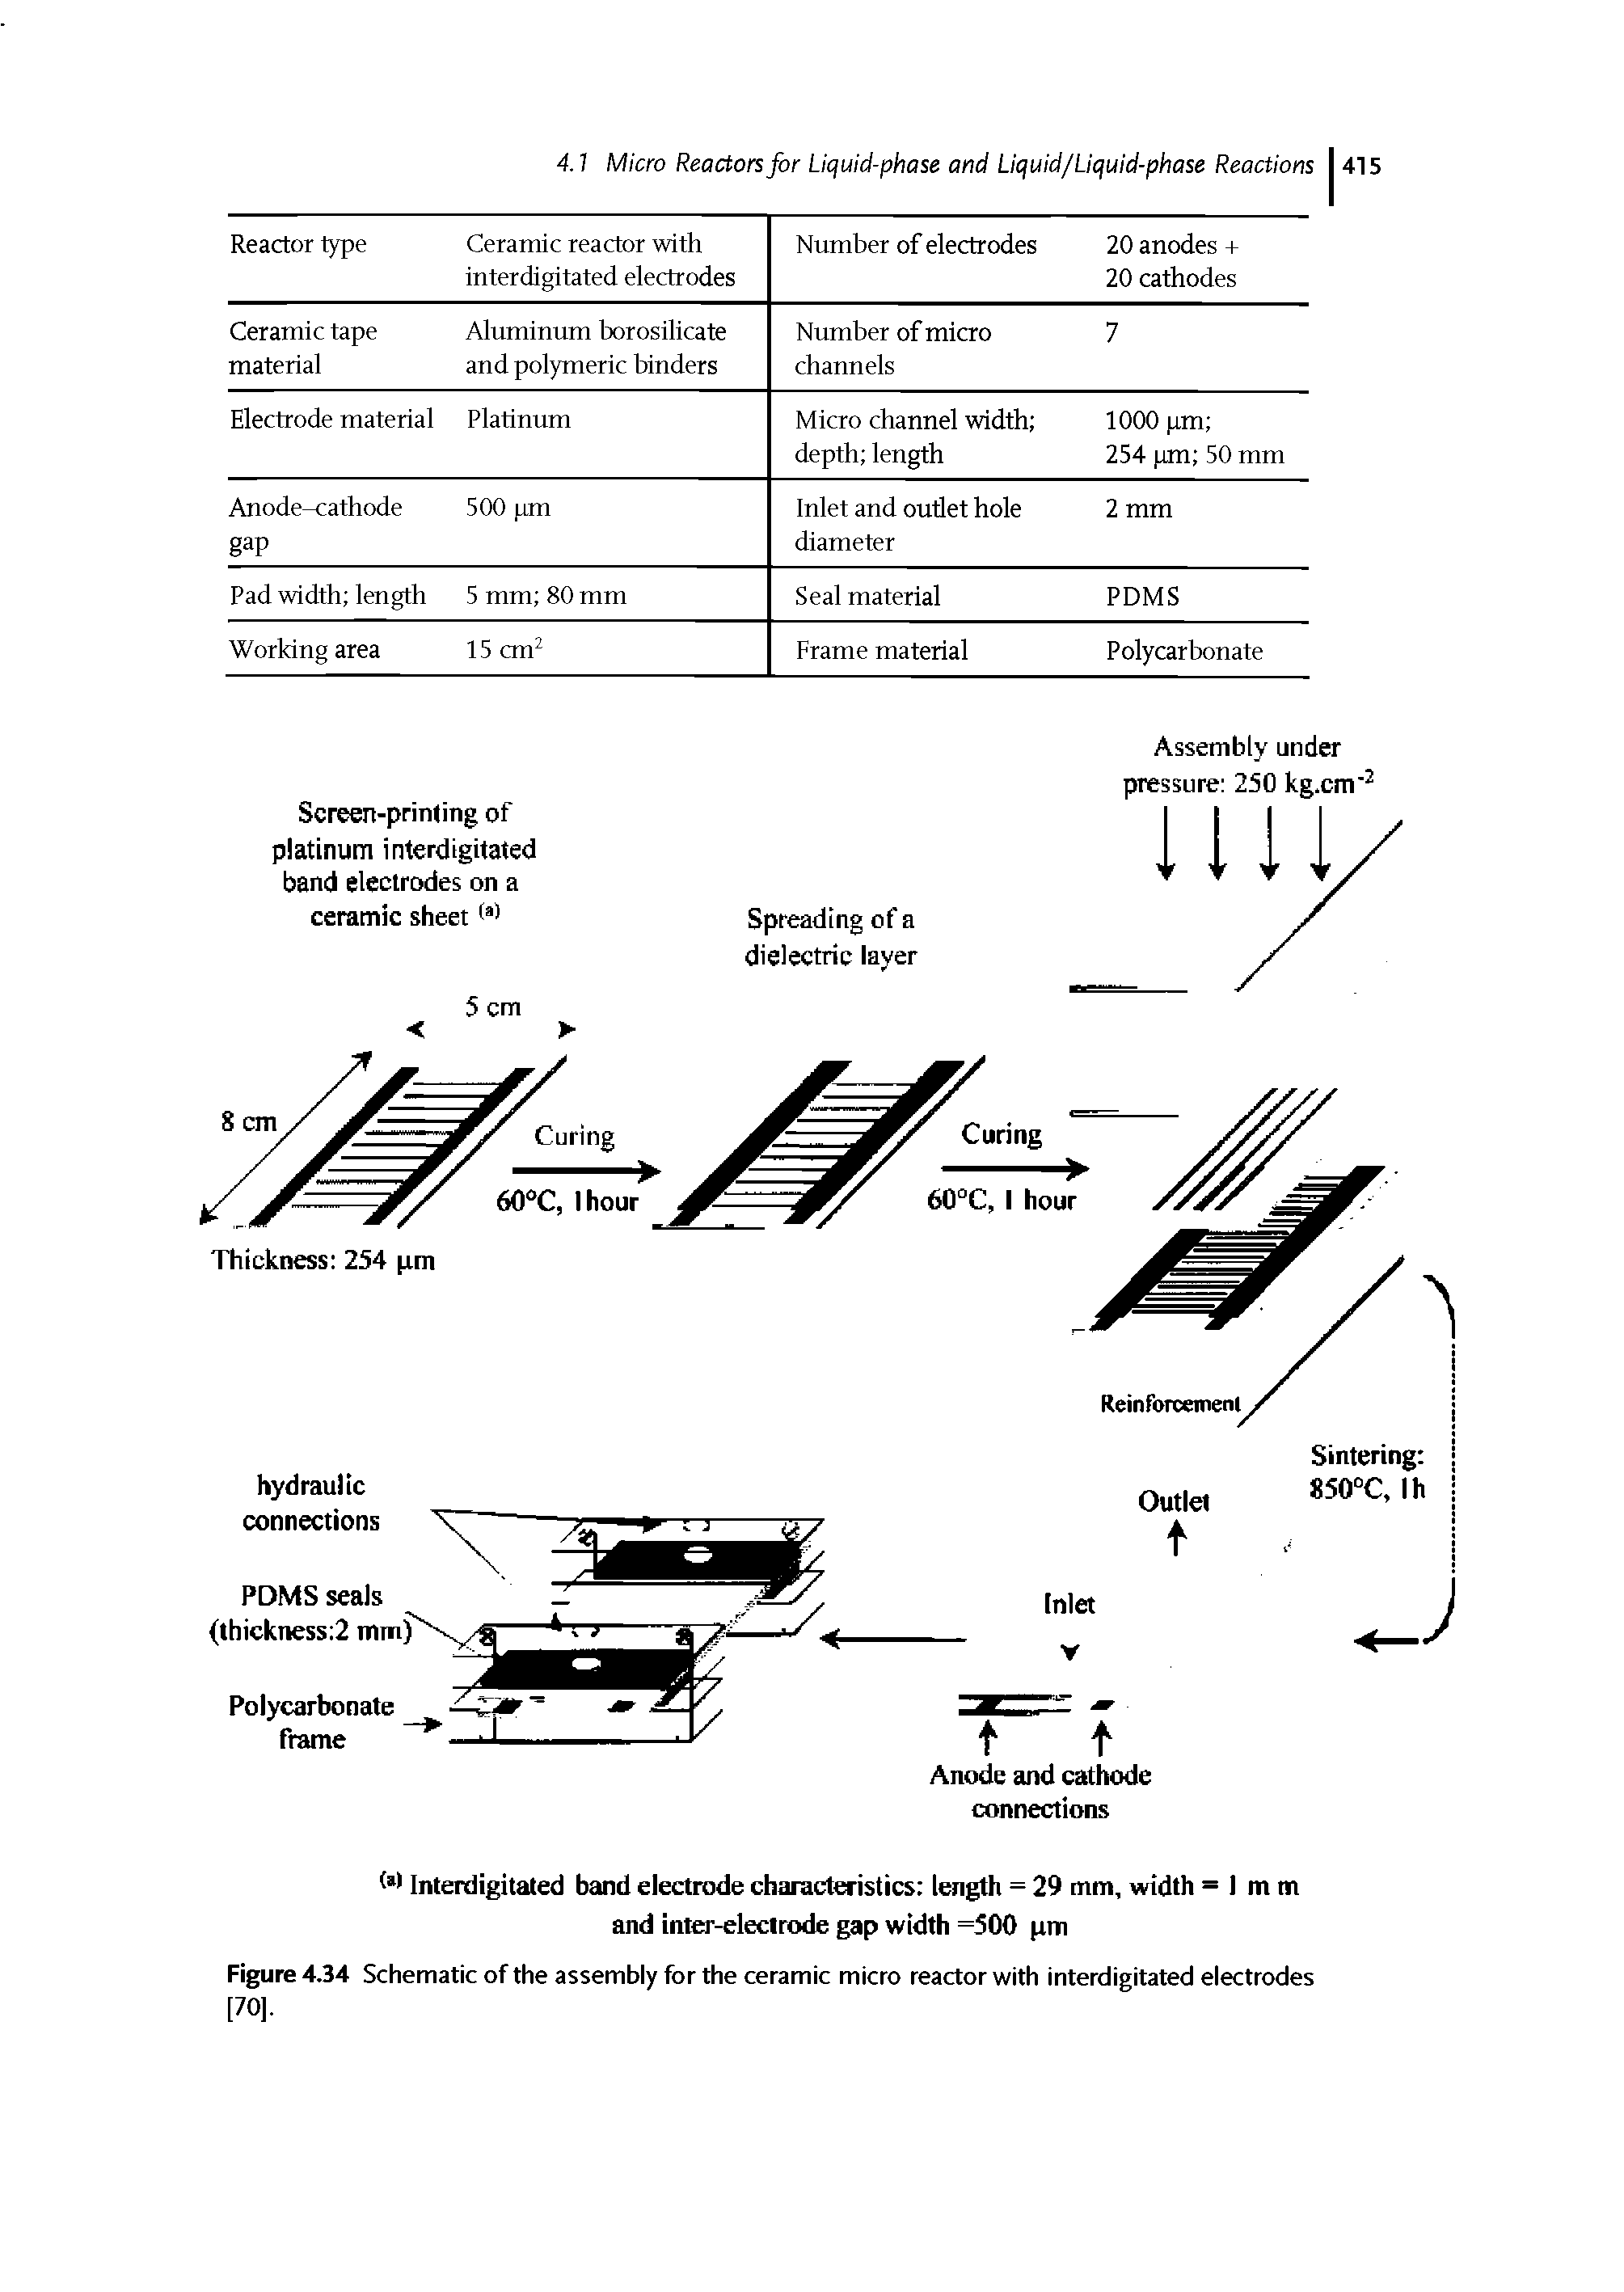 Figure 4.34 Schematic of the assembly for the ceramic micro reactor with interdigitated electrodes [70].